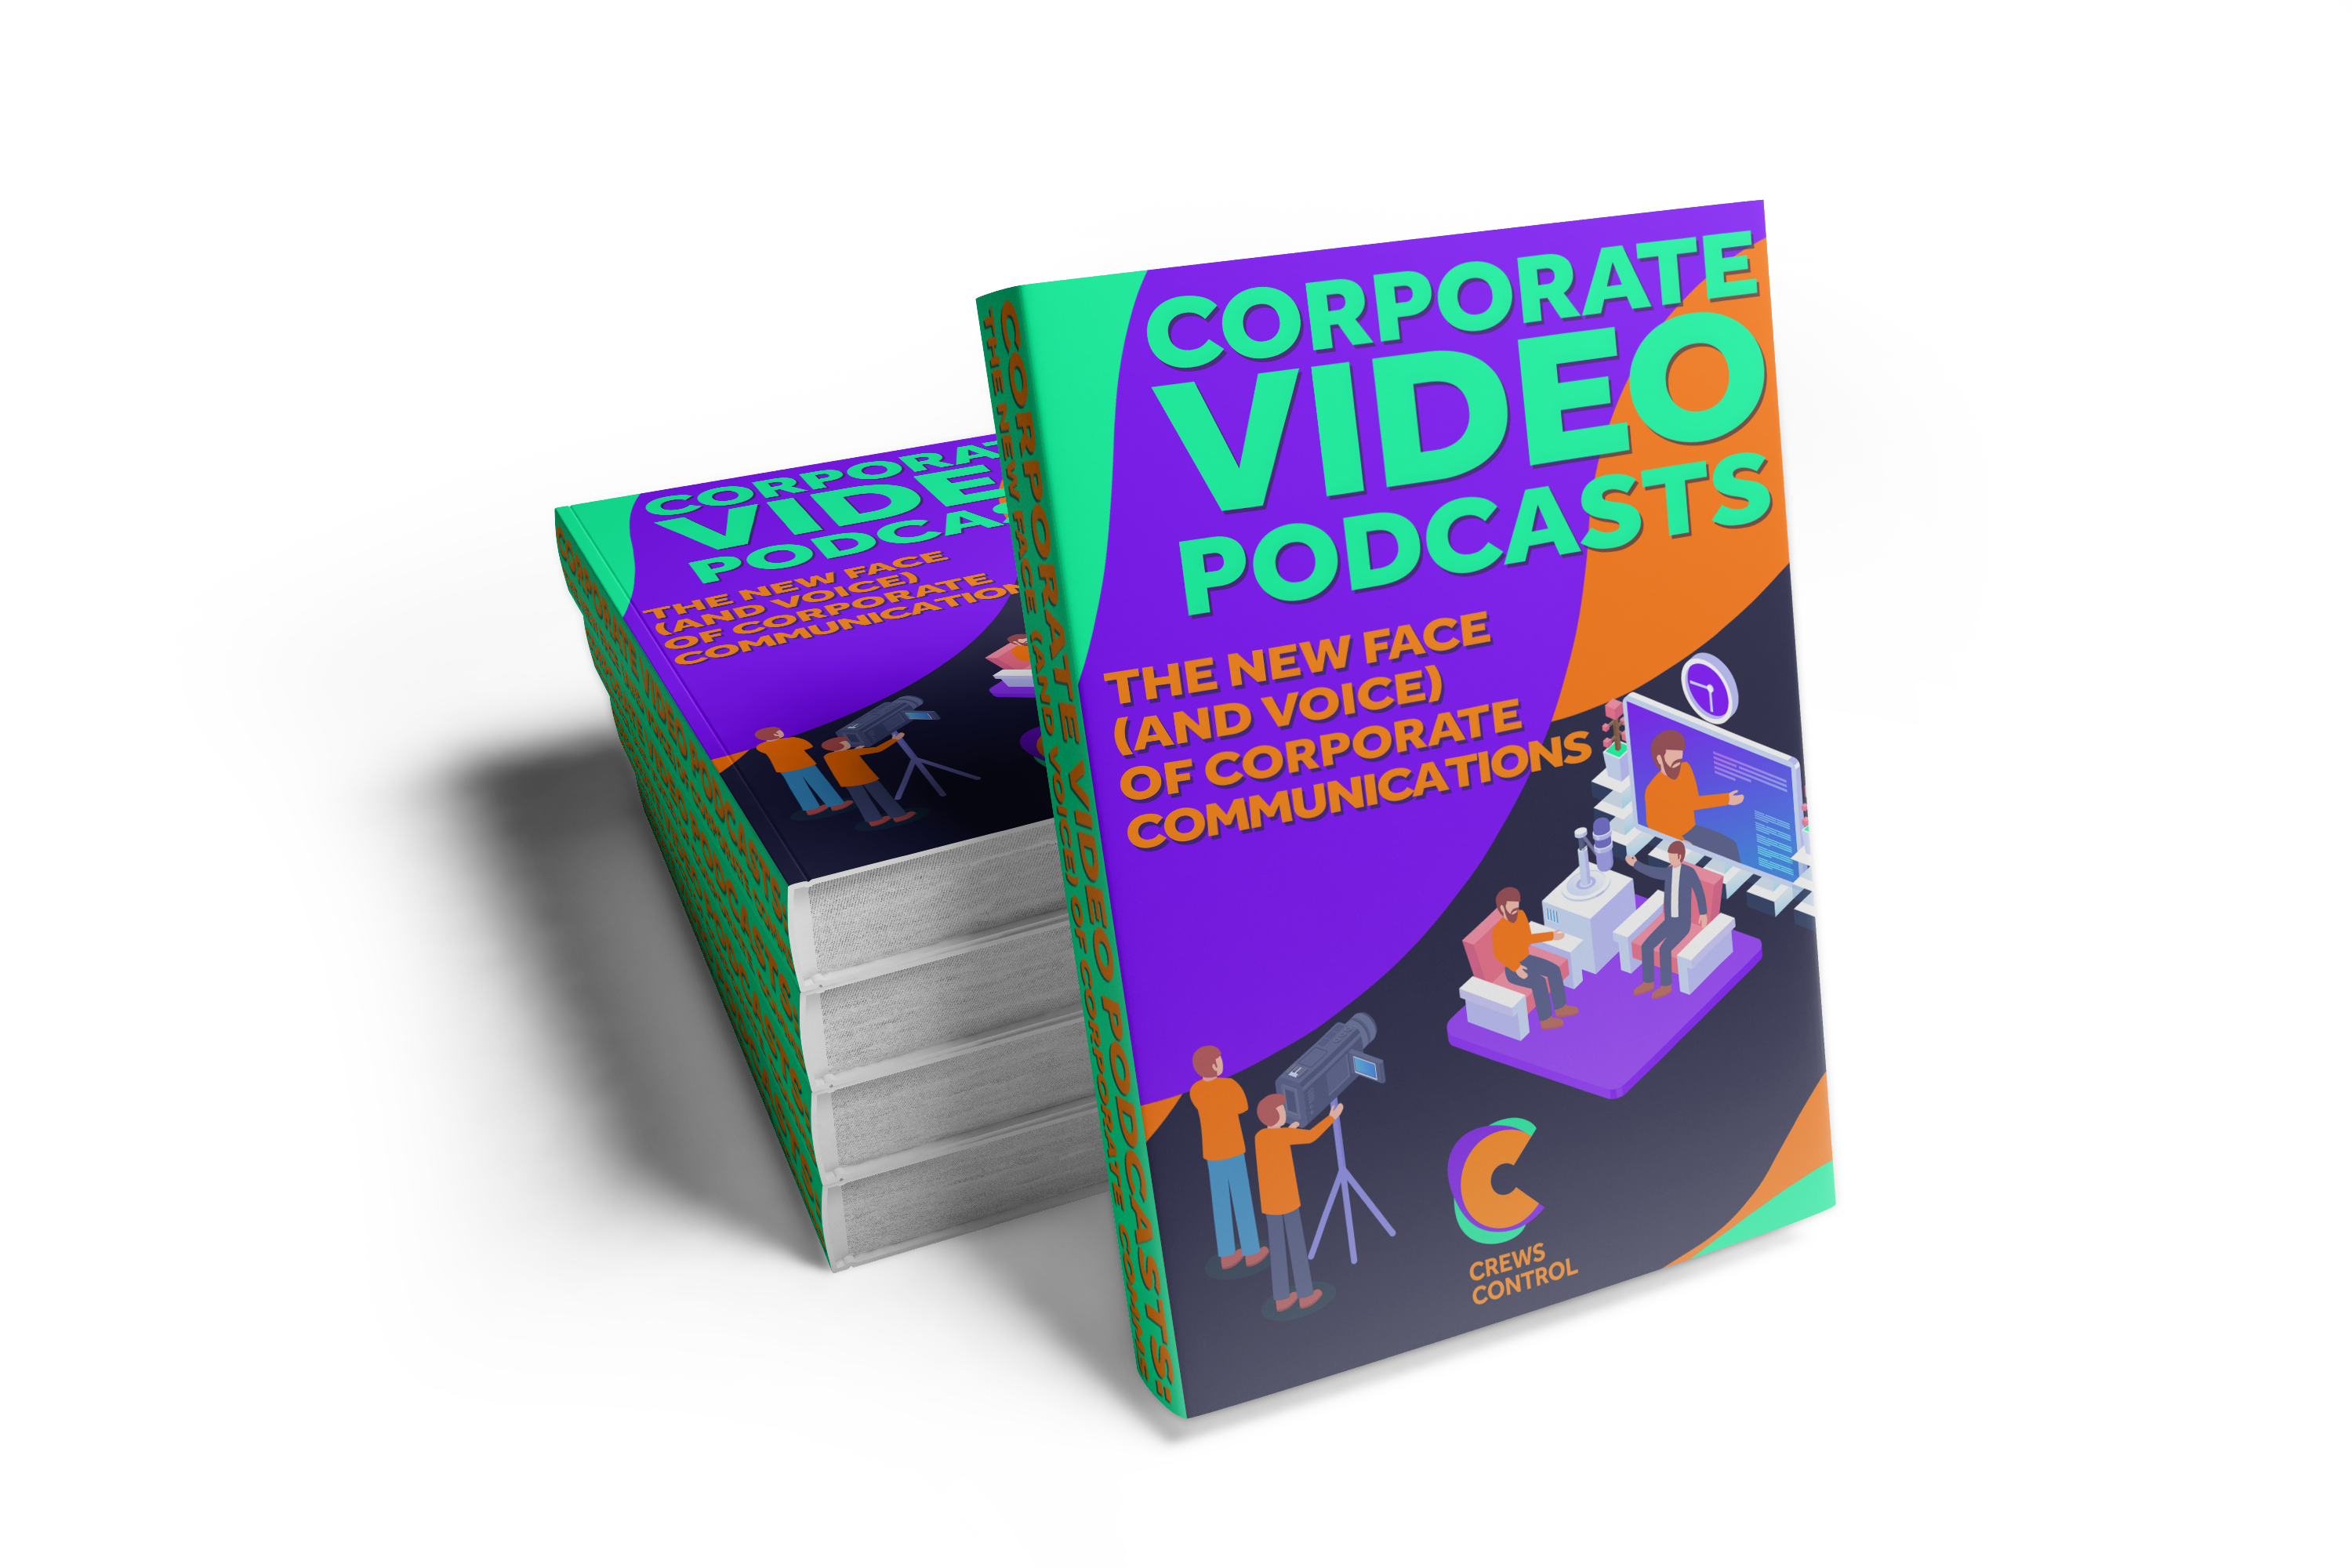 Corporate Video Podcasts: The New Face (and Voice) of Corporate Communications Free eBook!